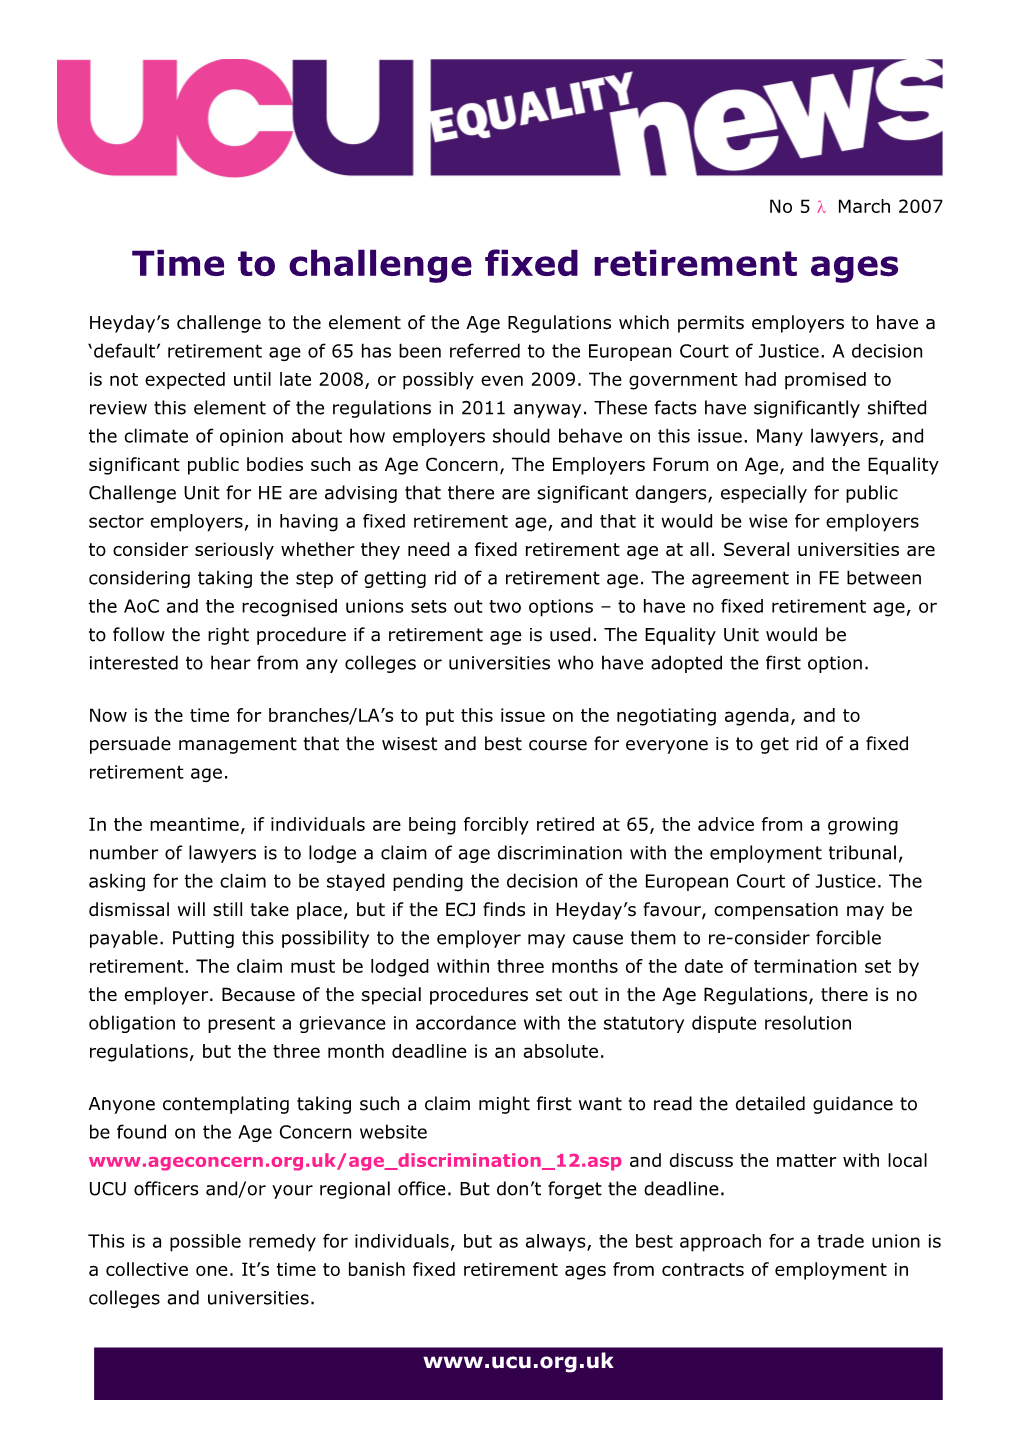 Time to Challenge Fixed Retirement Ages